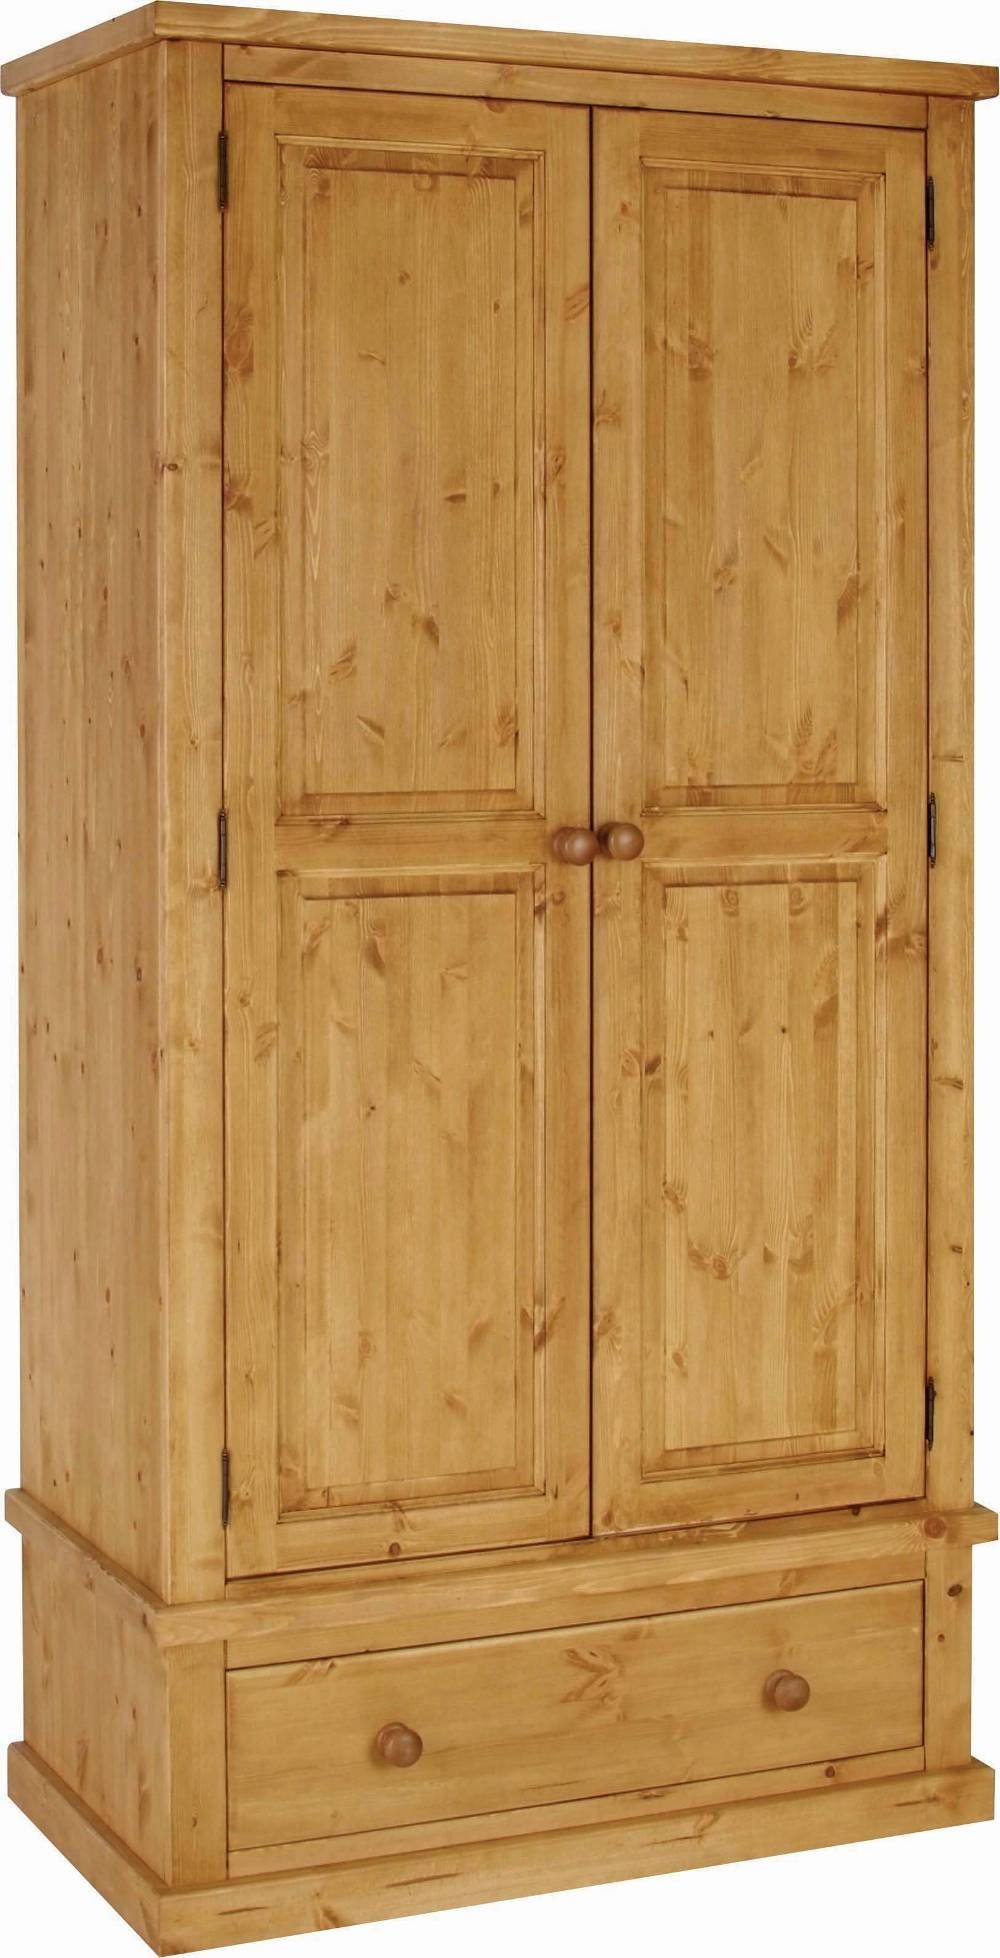 Chunky Pine Large Double Ladies Wardrobe With Drawers | Furniture Intended For Pine Double Wardrobes (View 4 of 15)